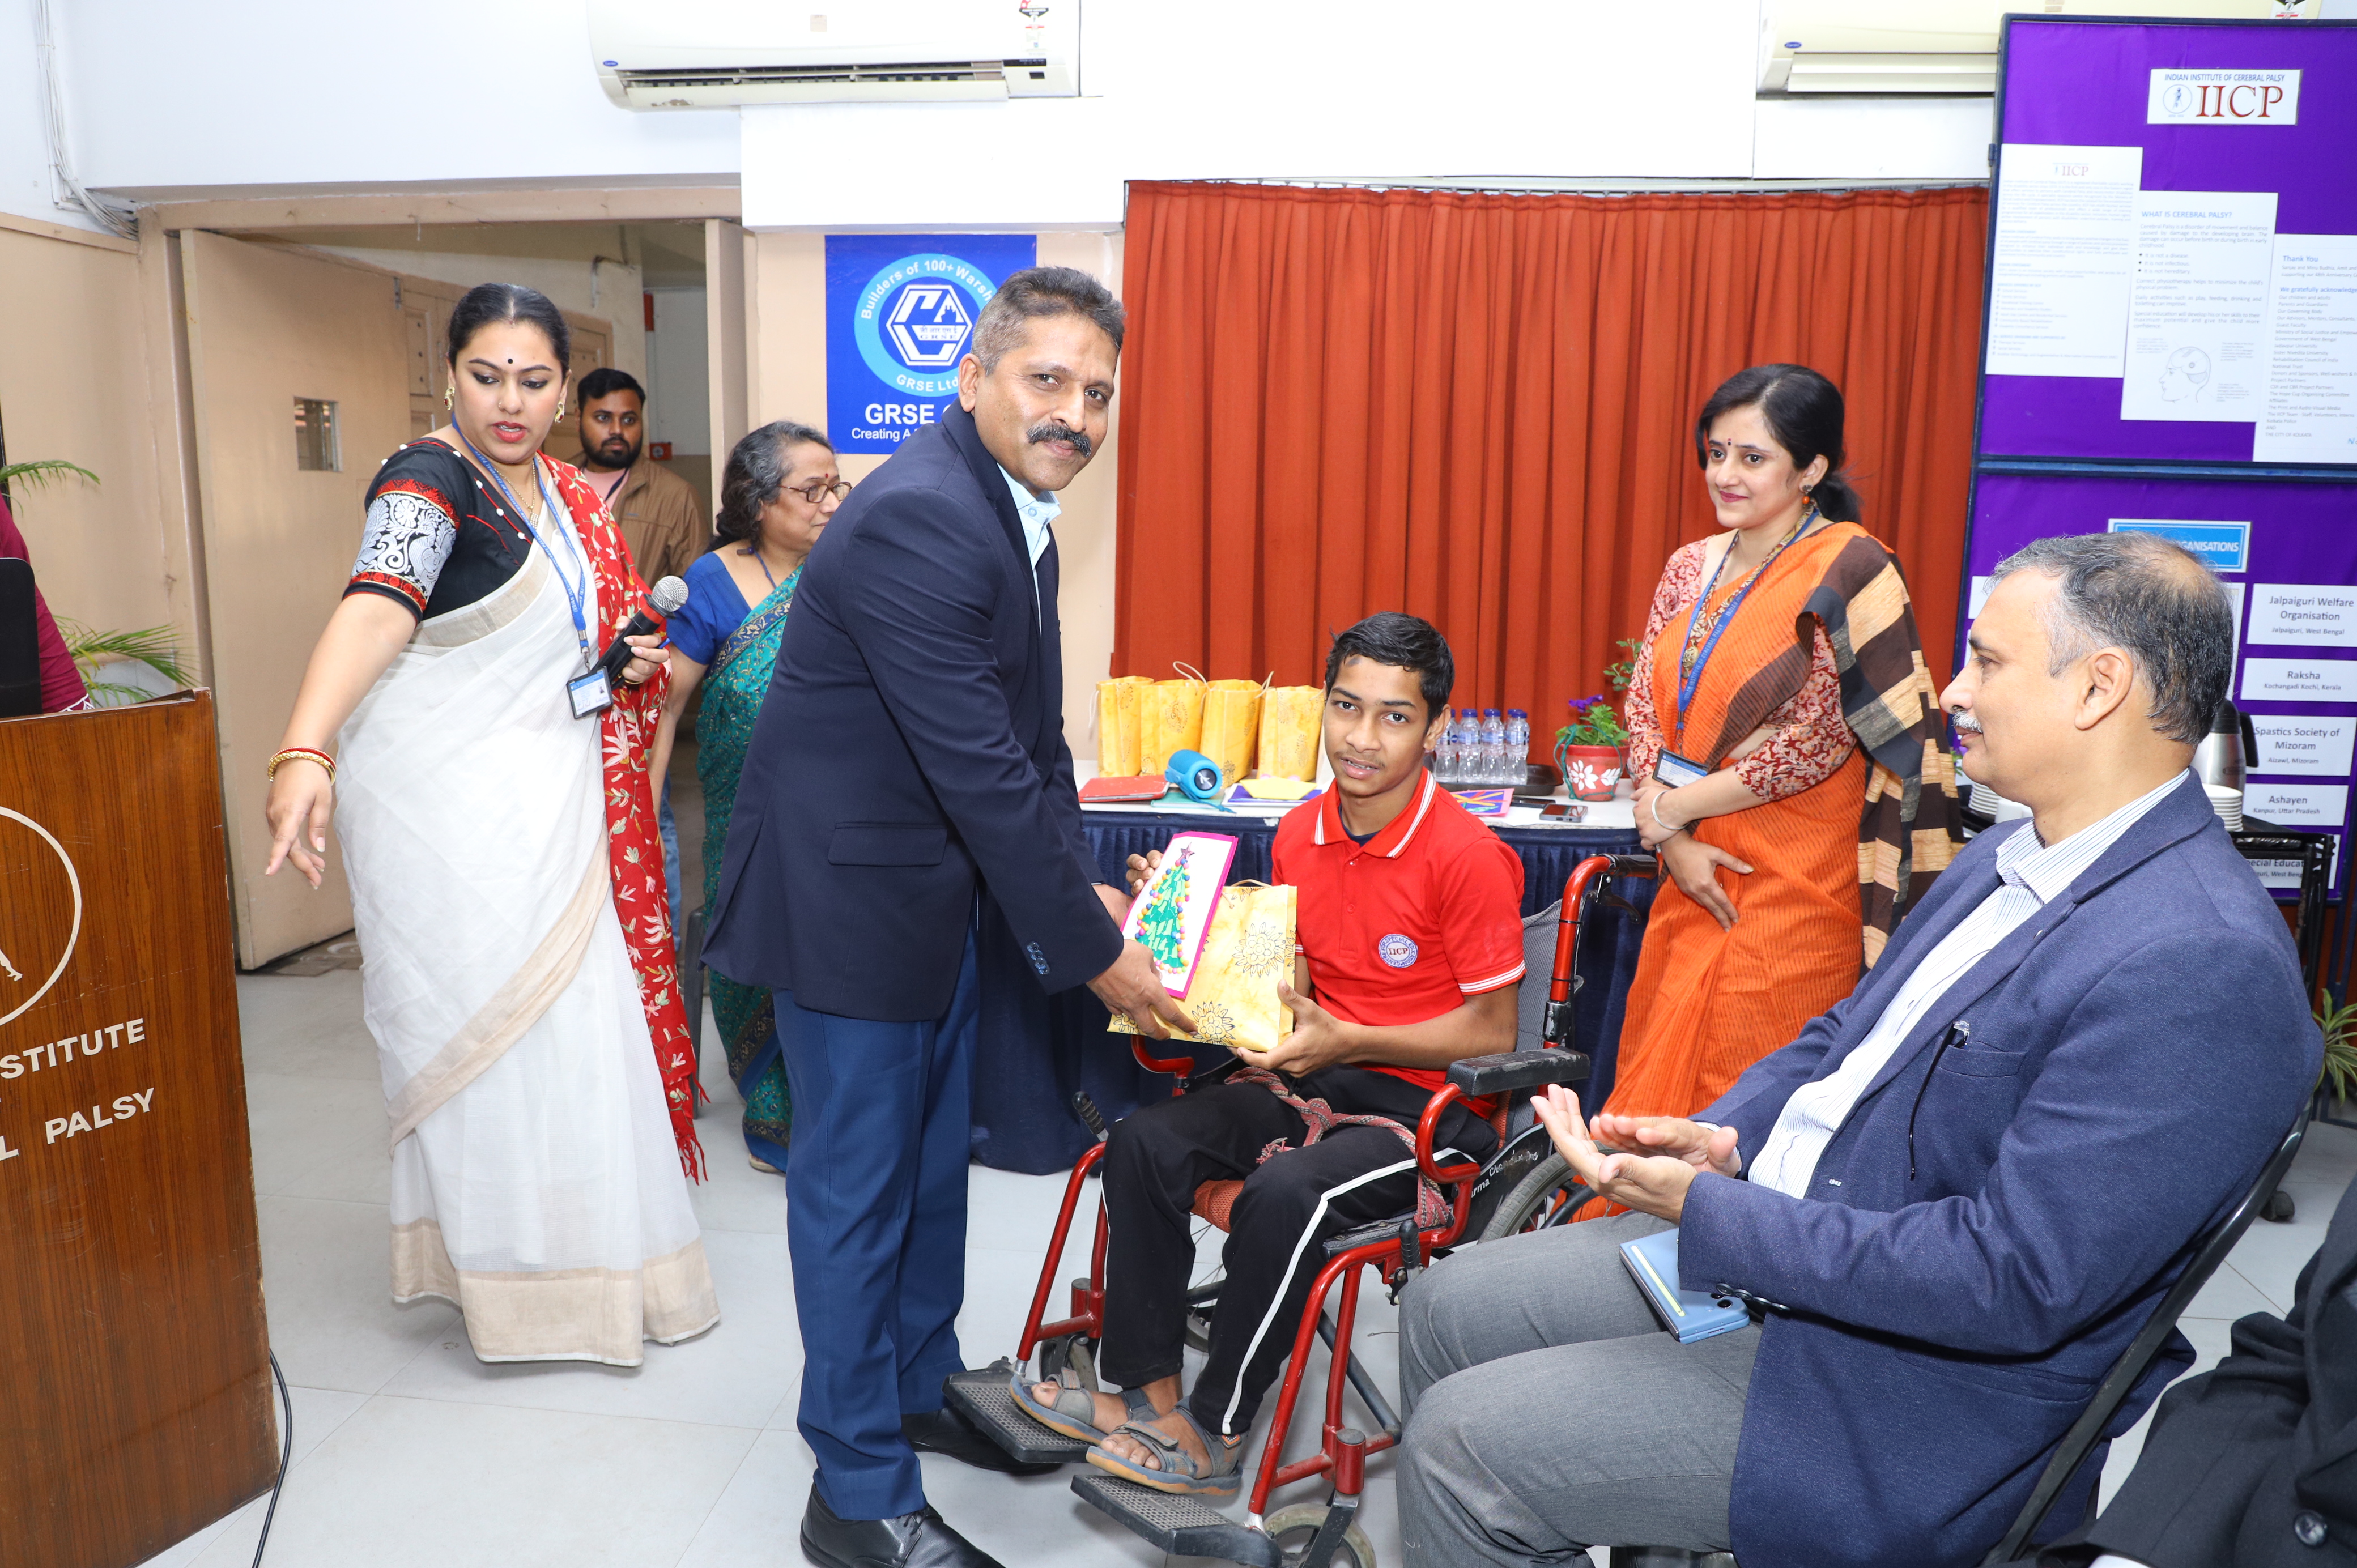 GRSE Sustains a Decade - Long partnership with the Indian Institute of Cerebral Palsy on 13 Dec 23